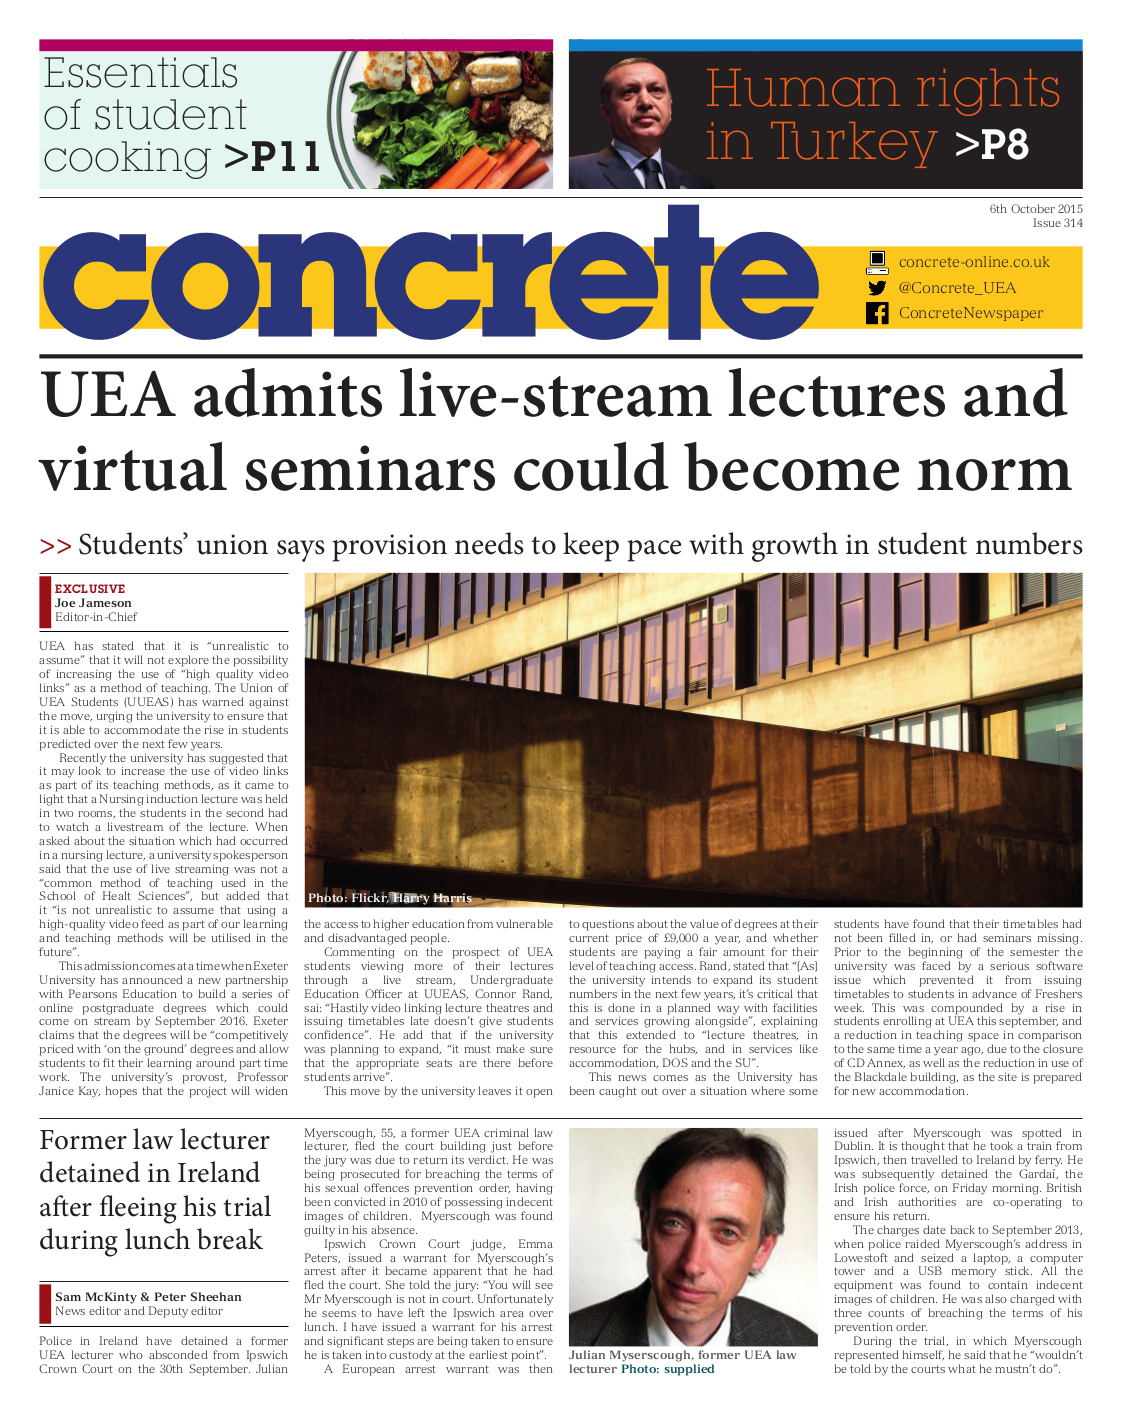 We think the front-page story about the university's admission about using technology to get around spacing issues is important for UEA students to know about.